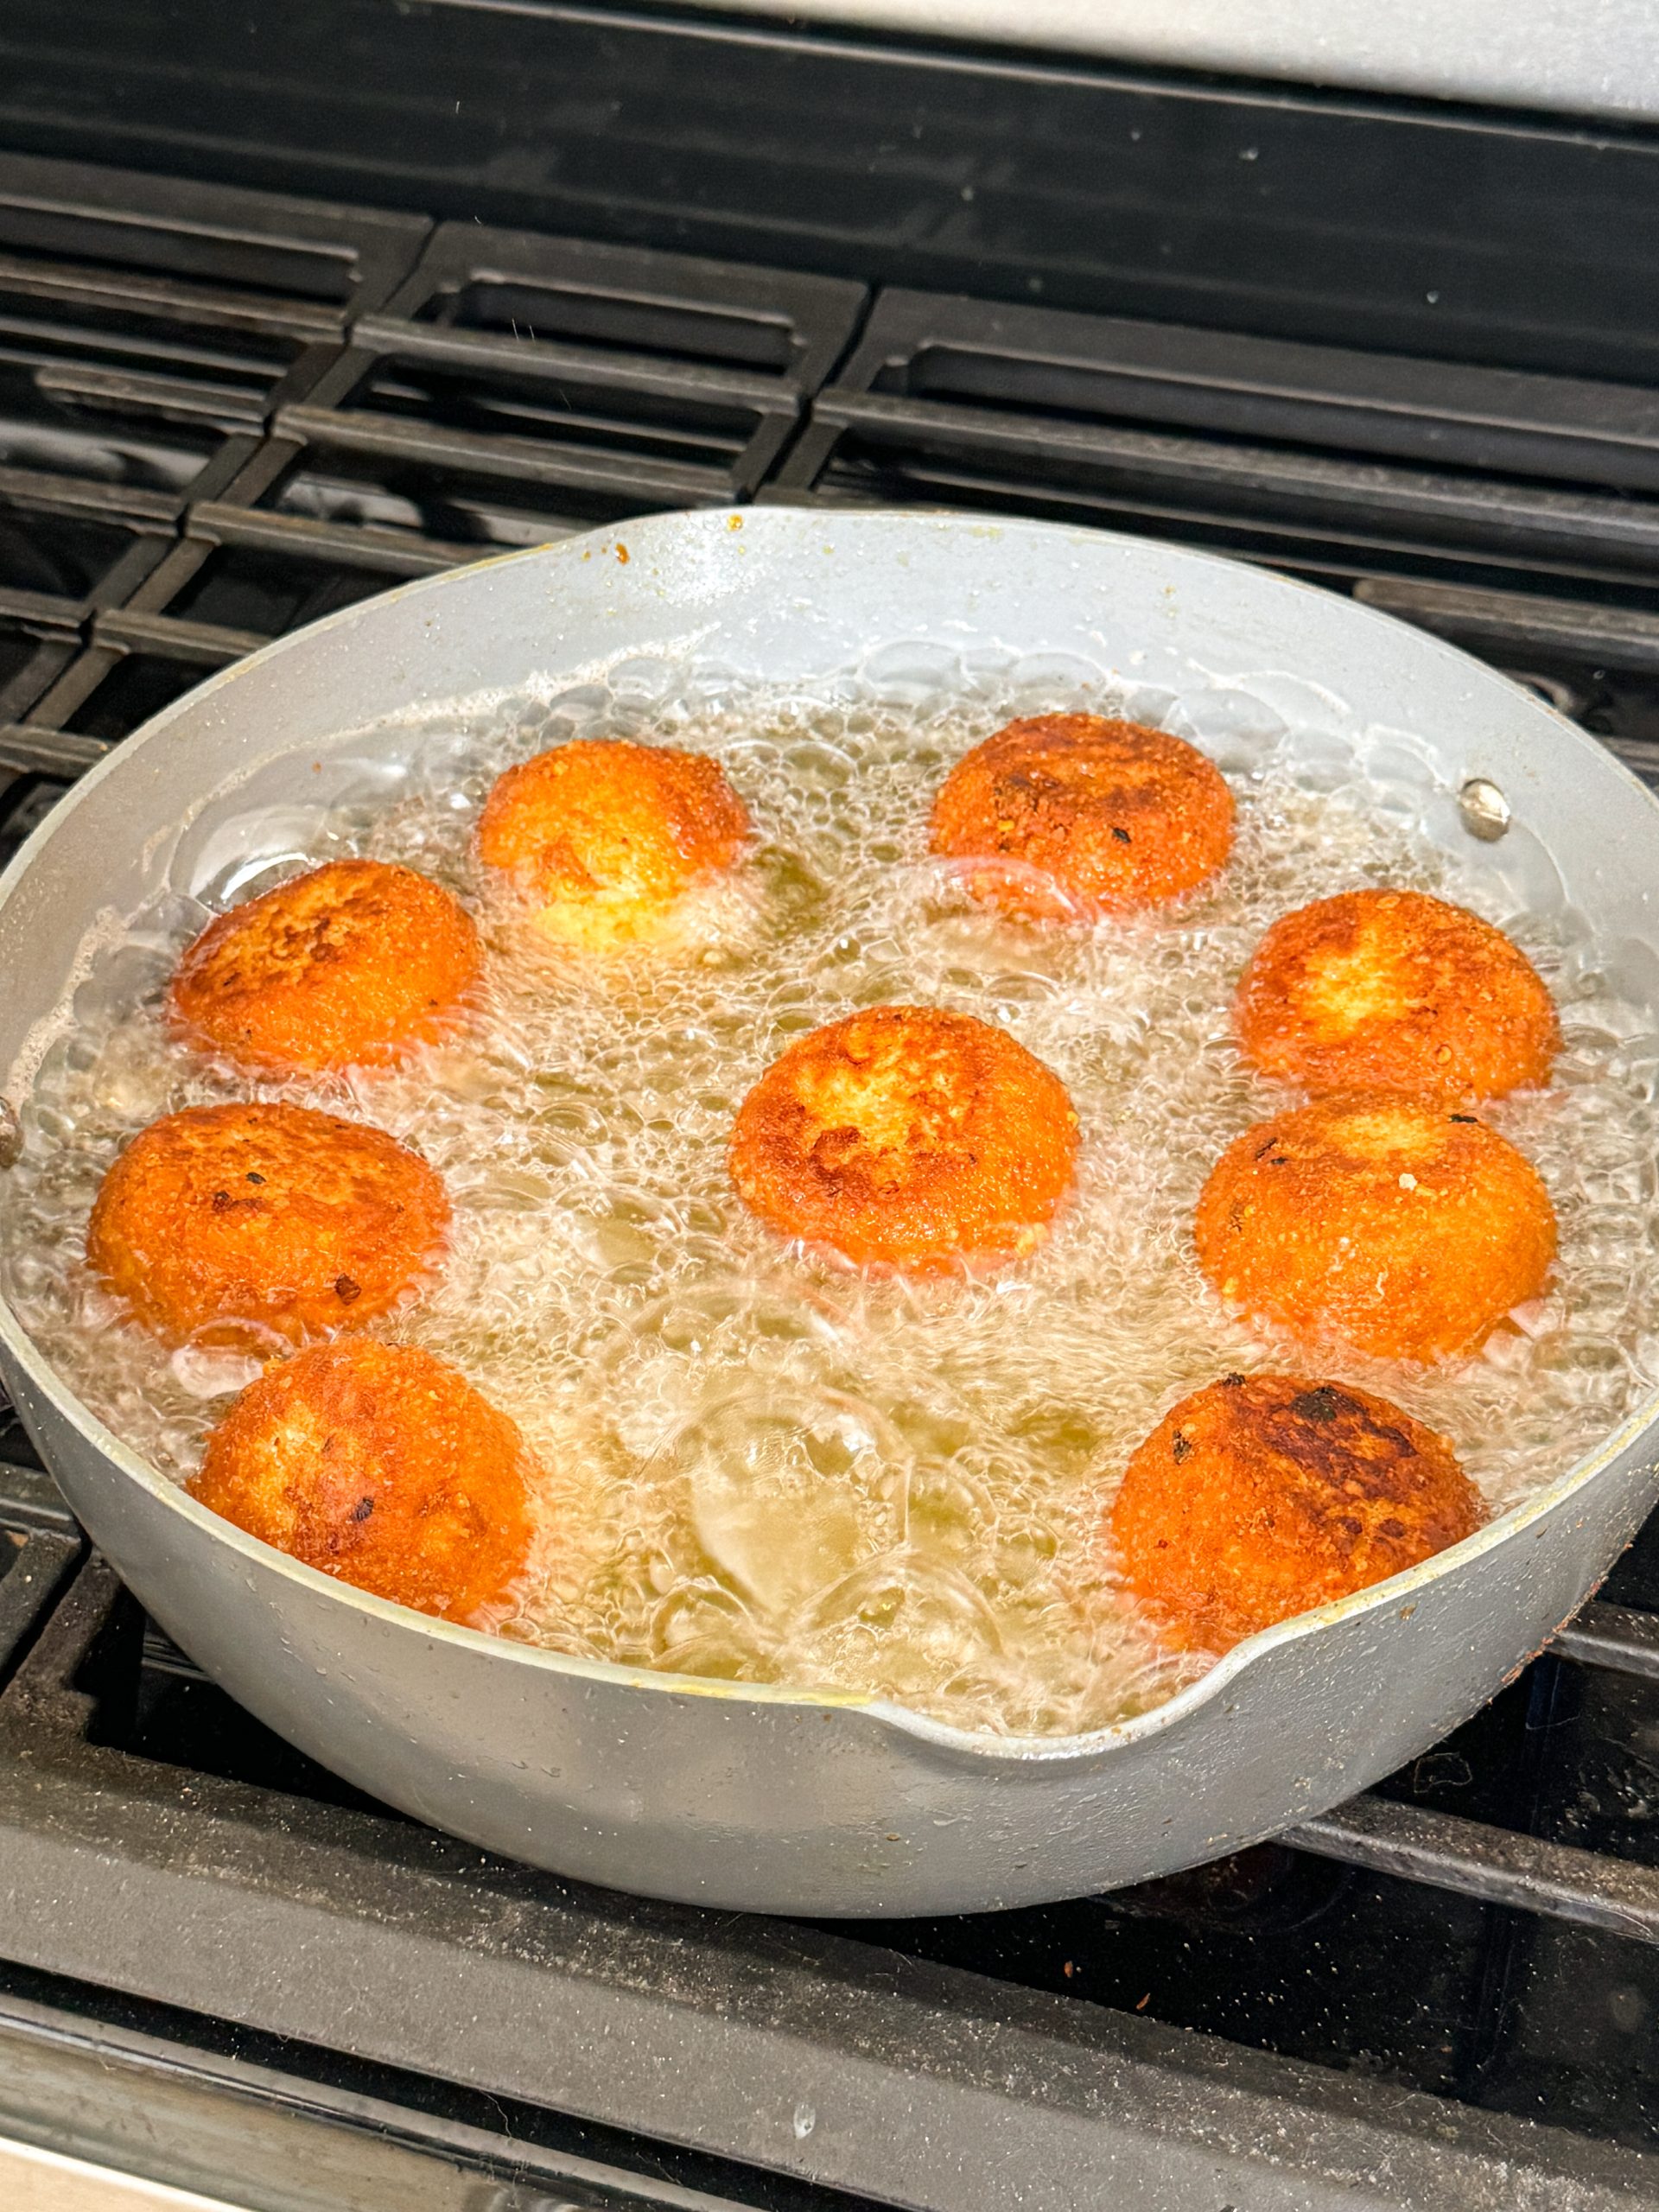 mashed potato balls being fried in a large skillet; balls have a golden color on them